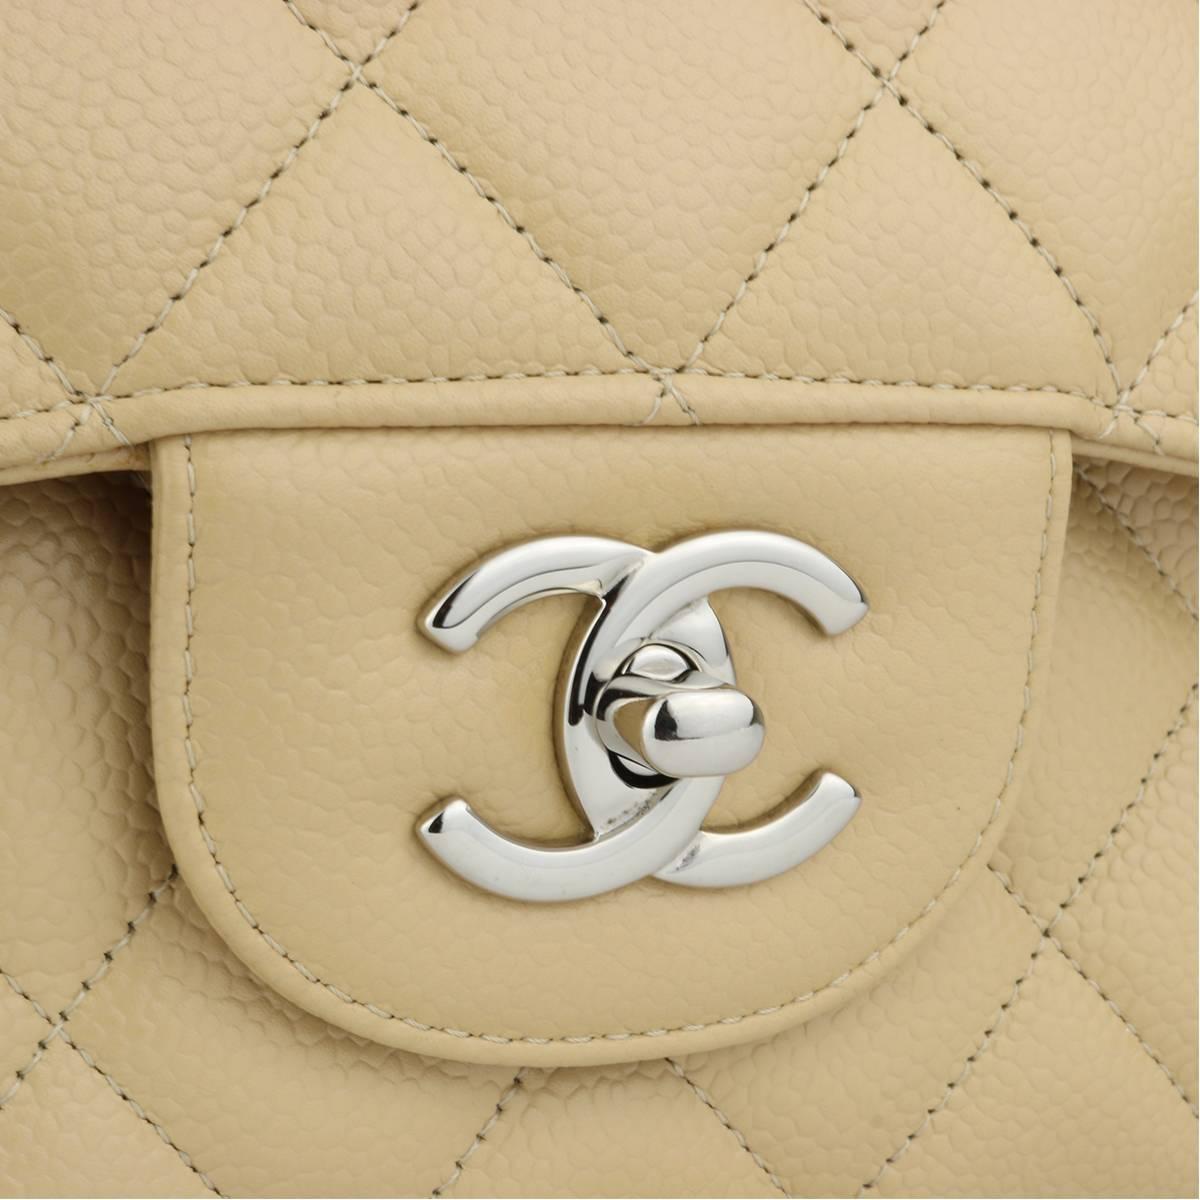 Authentic CHANEL Classic Double Flap Jumbo Beige Clair Caviar with Silver Hardware 2013.

This stunning bag is in mint condition, the bag still holds the original shape and the hardware is still very shiny.

Exterior Condition: Mint condition, tiny